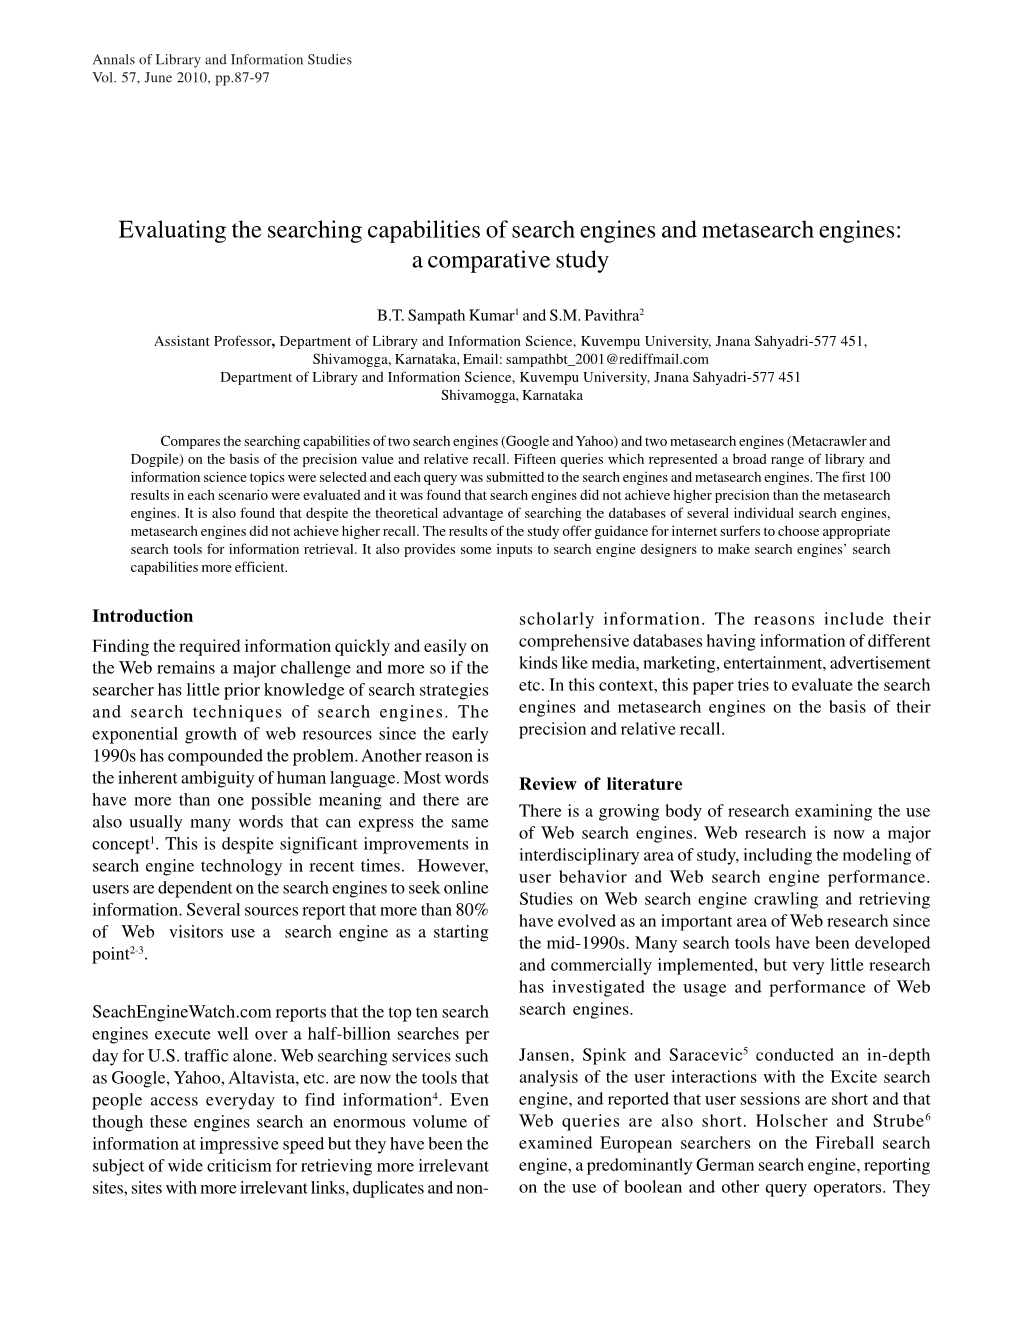 Evaluating the Searching Capabilities of Search Engines and Metasearch Engines: a Comparative Study